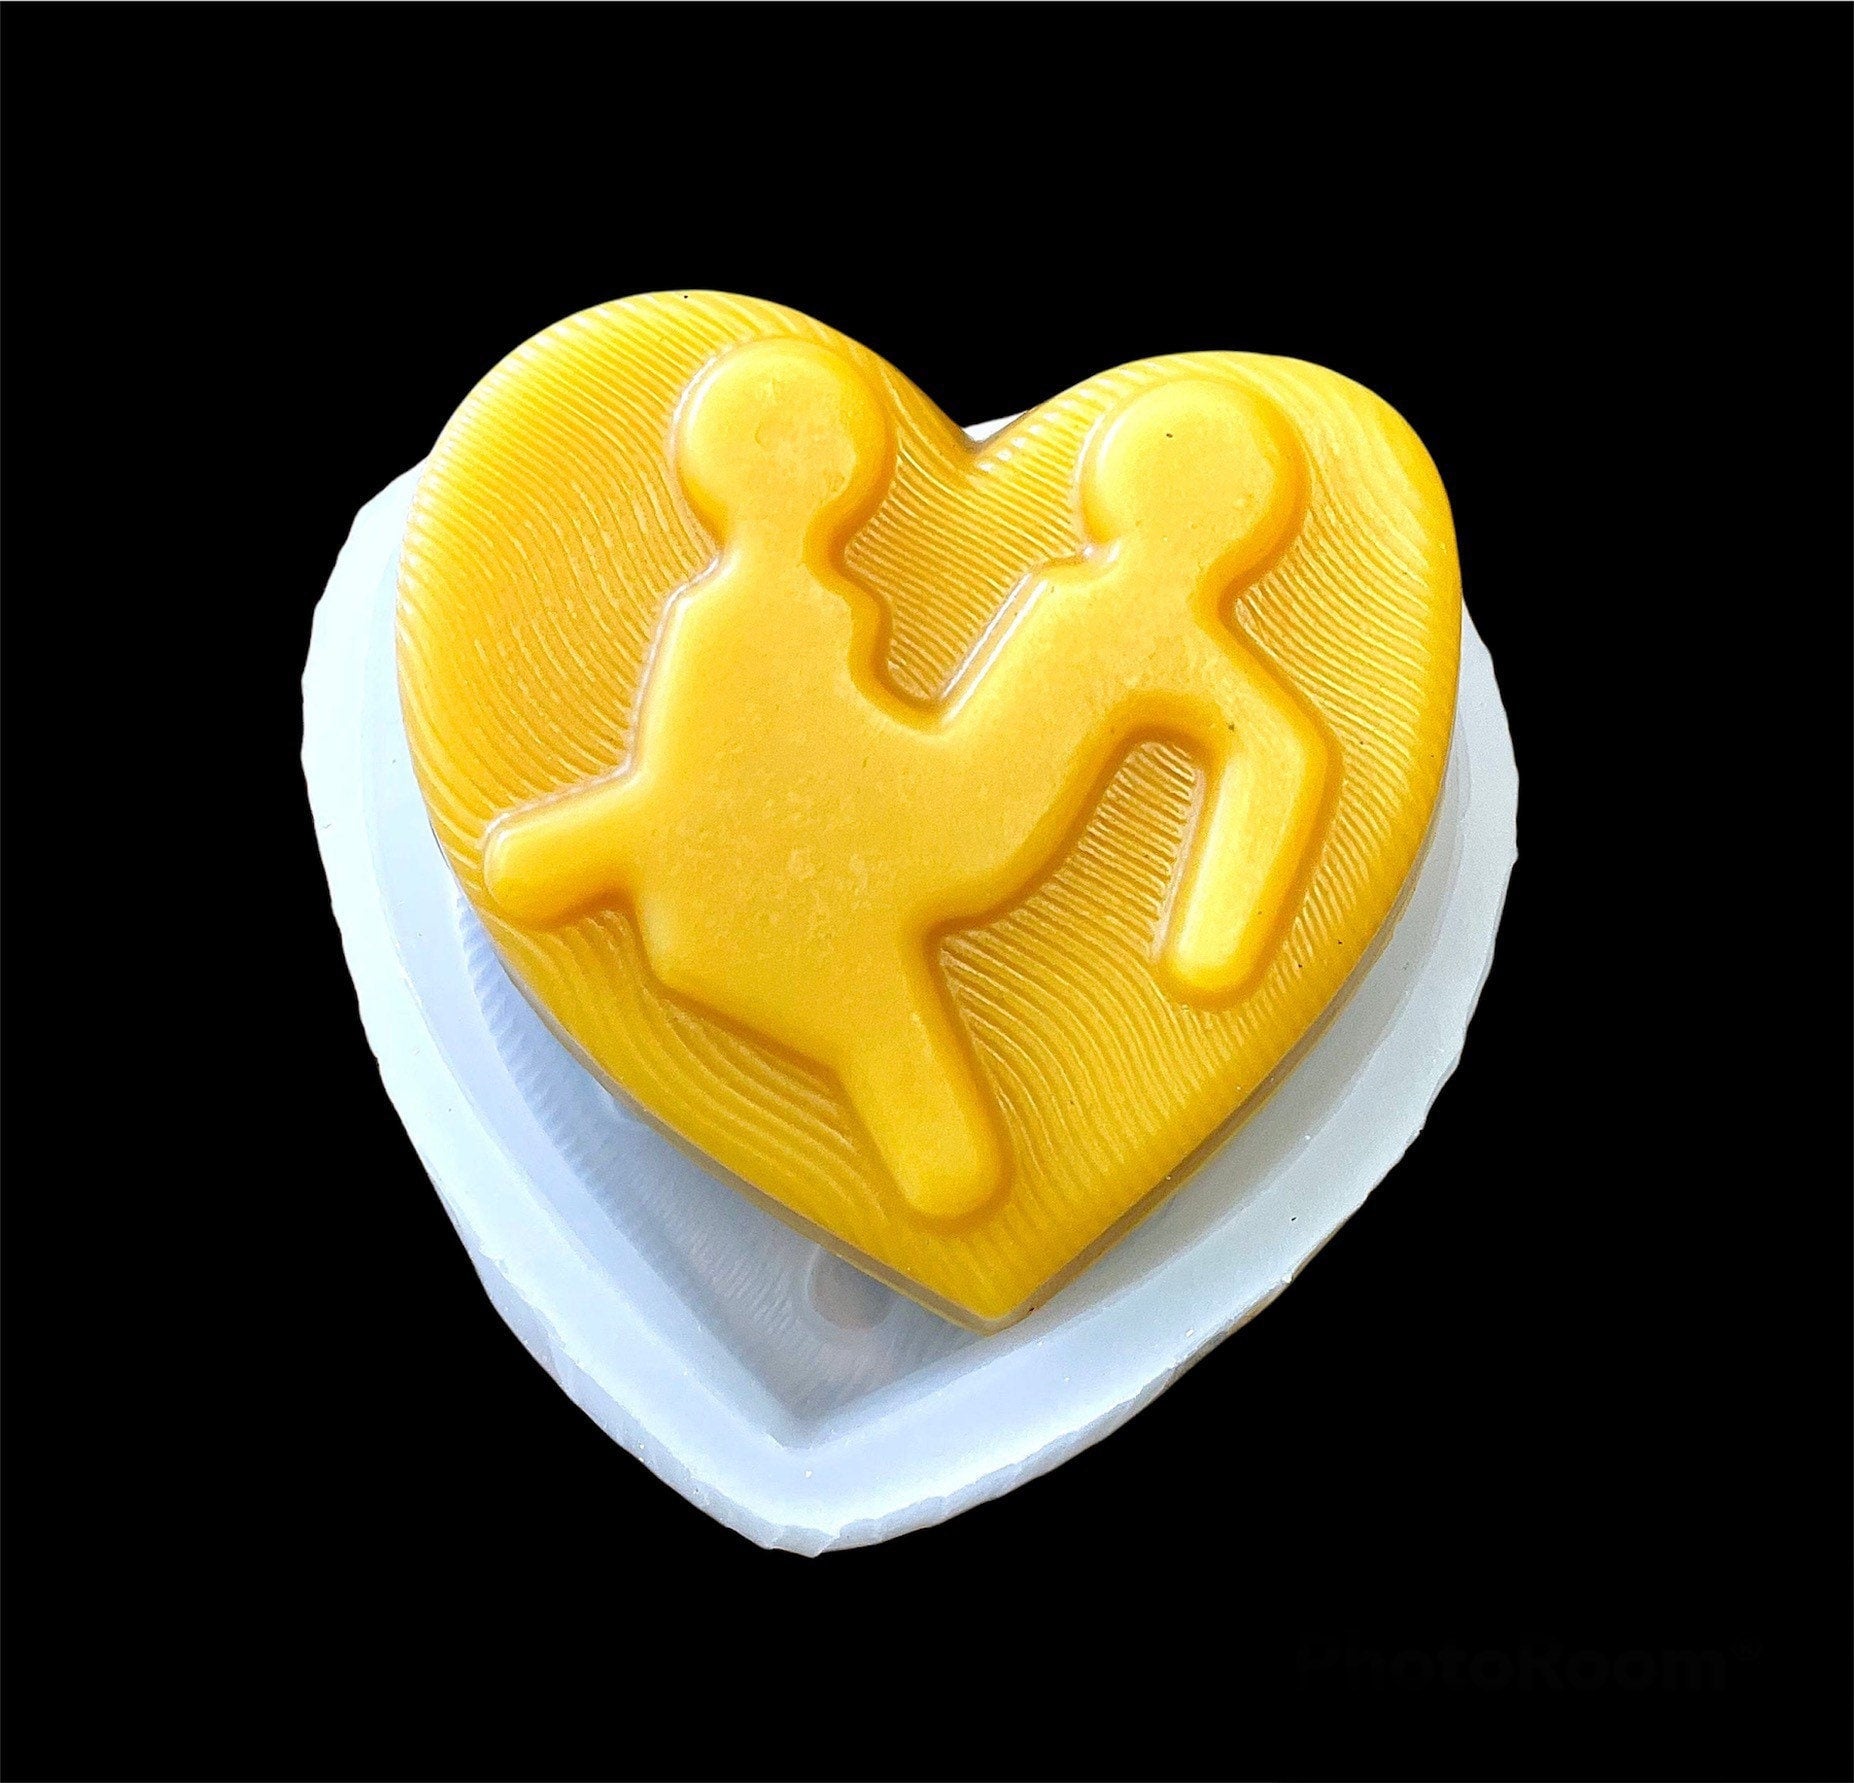 Heart Teardrop Small Silicone Soap Mold 4001 - Wholesale Supplies Plus